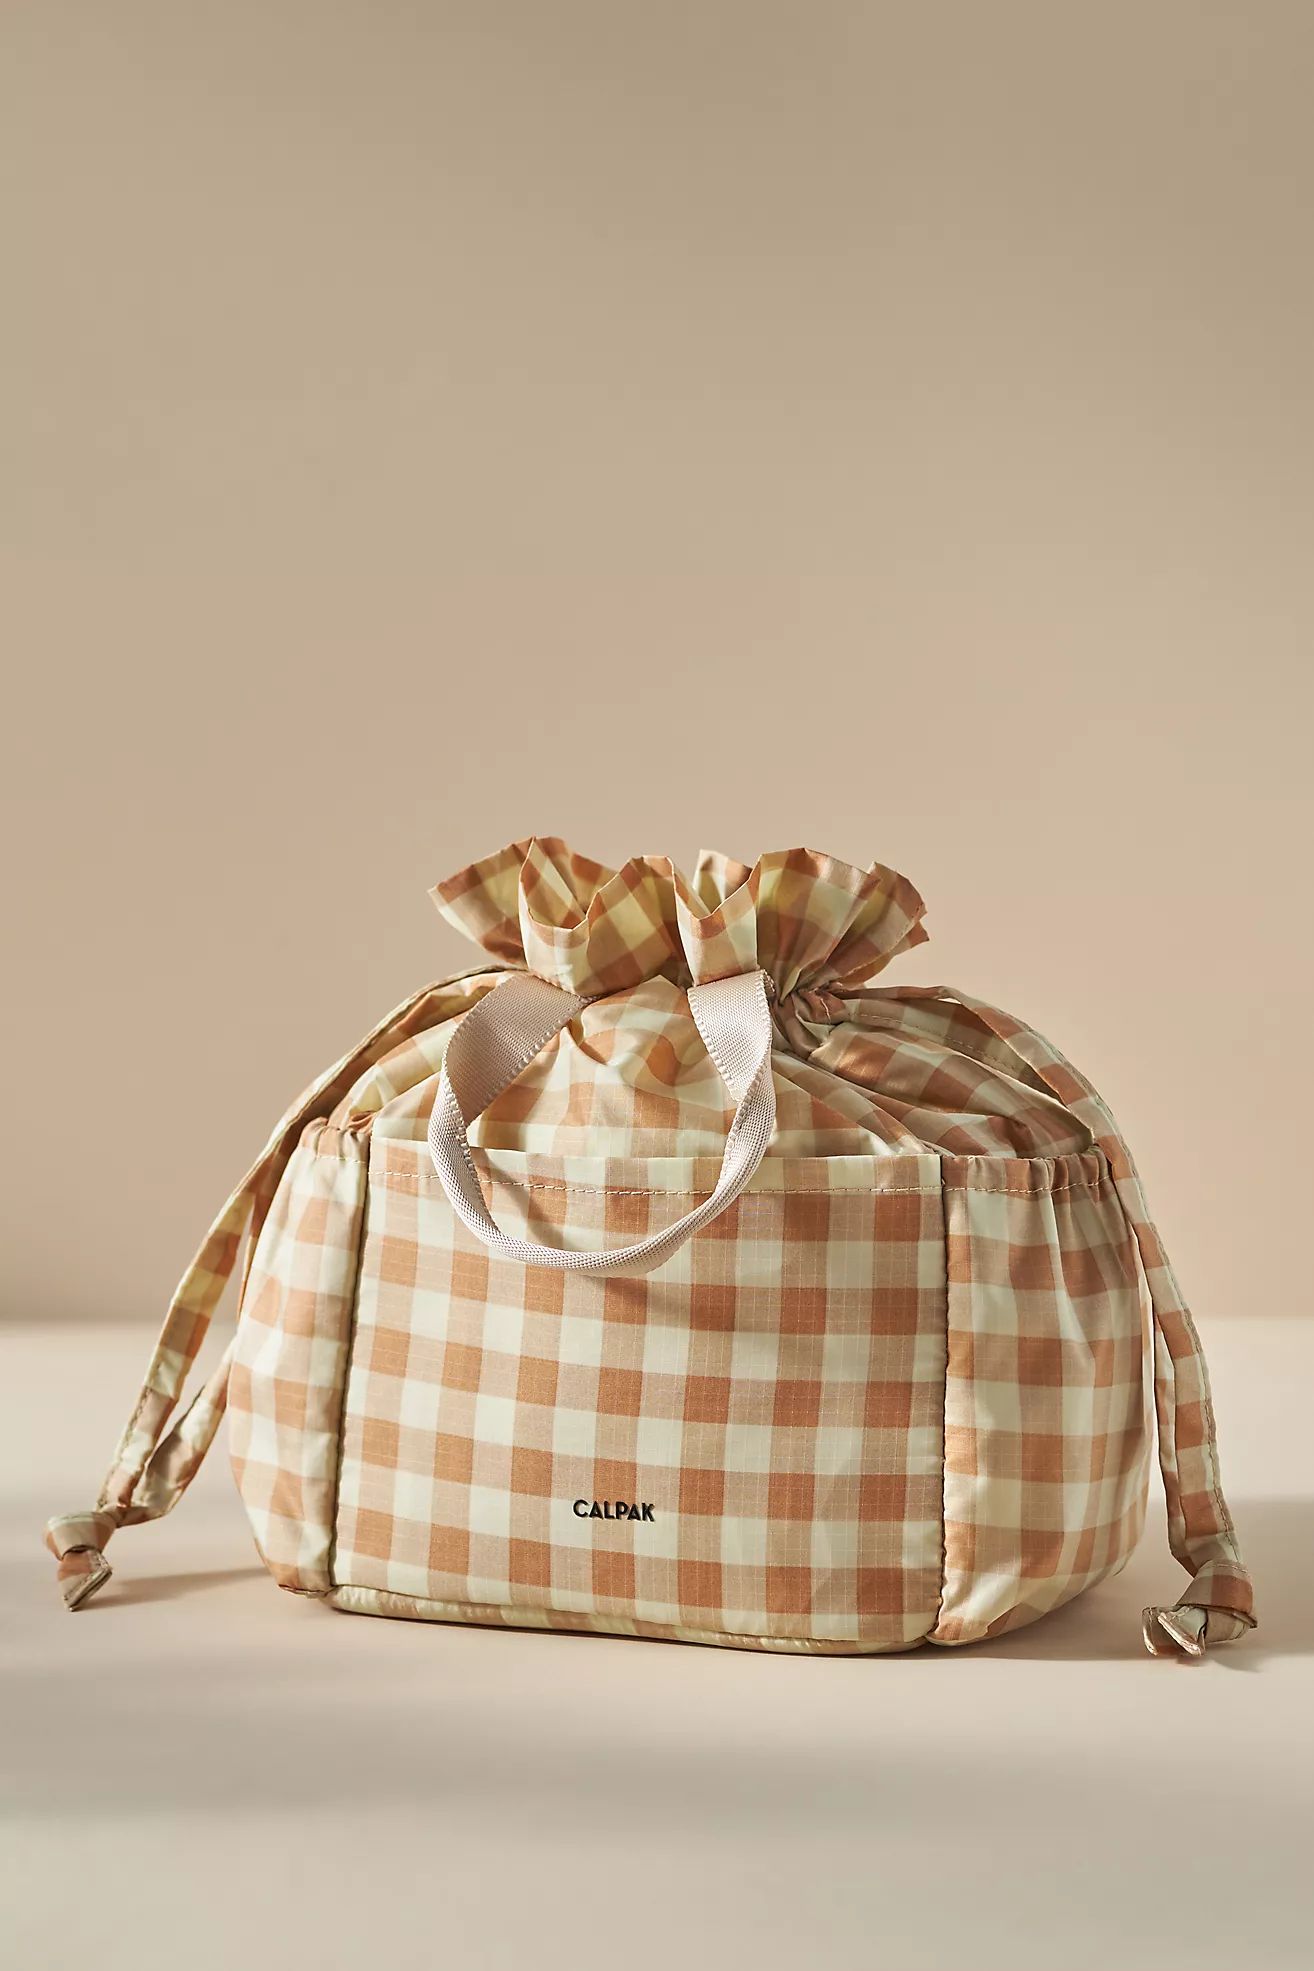 CALPAK Insulated Lunch Bag | Anthropologie (US)